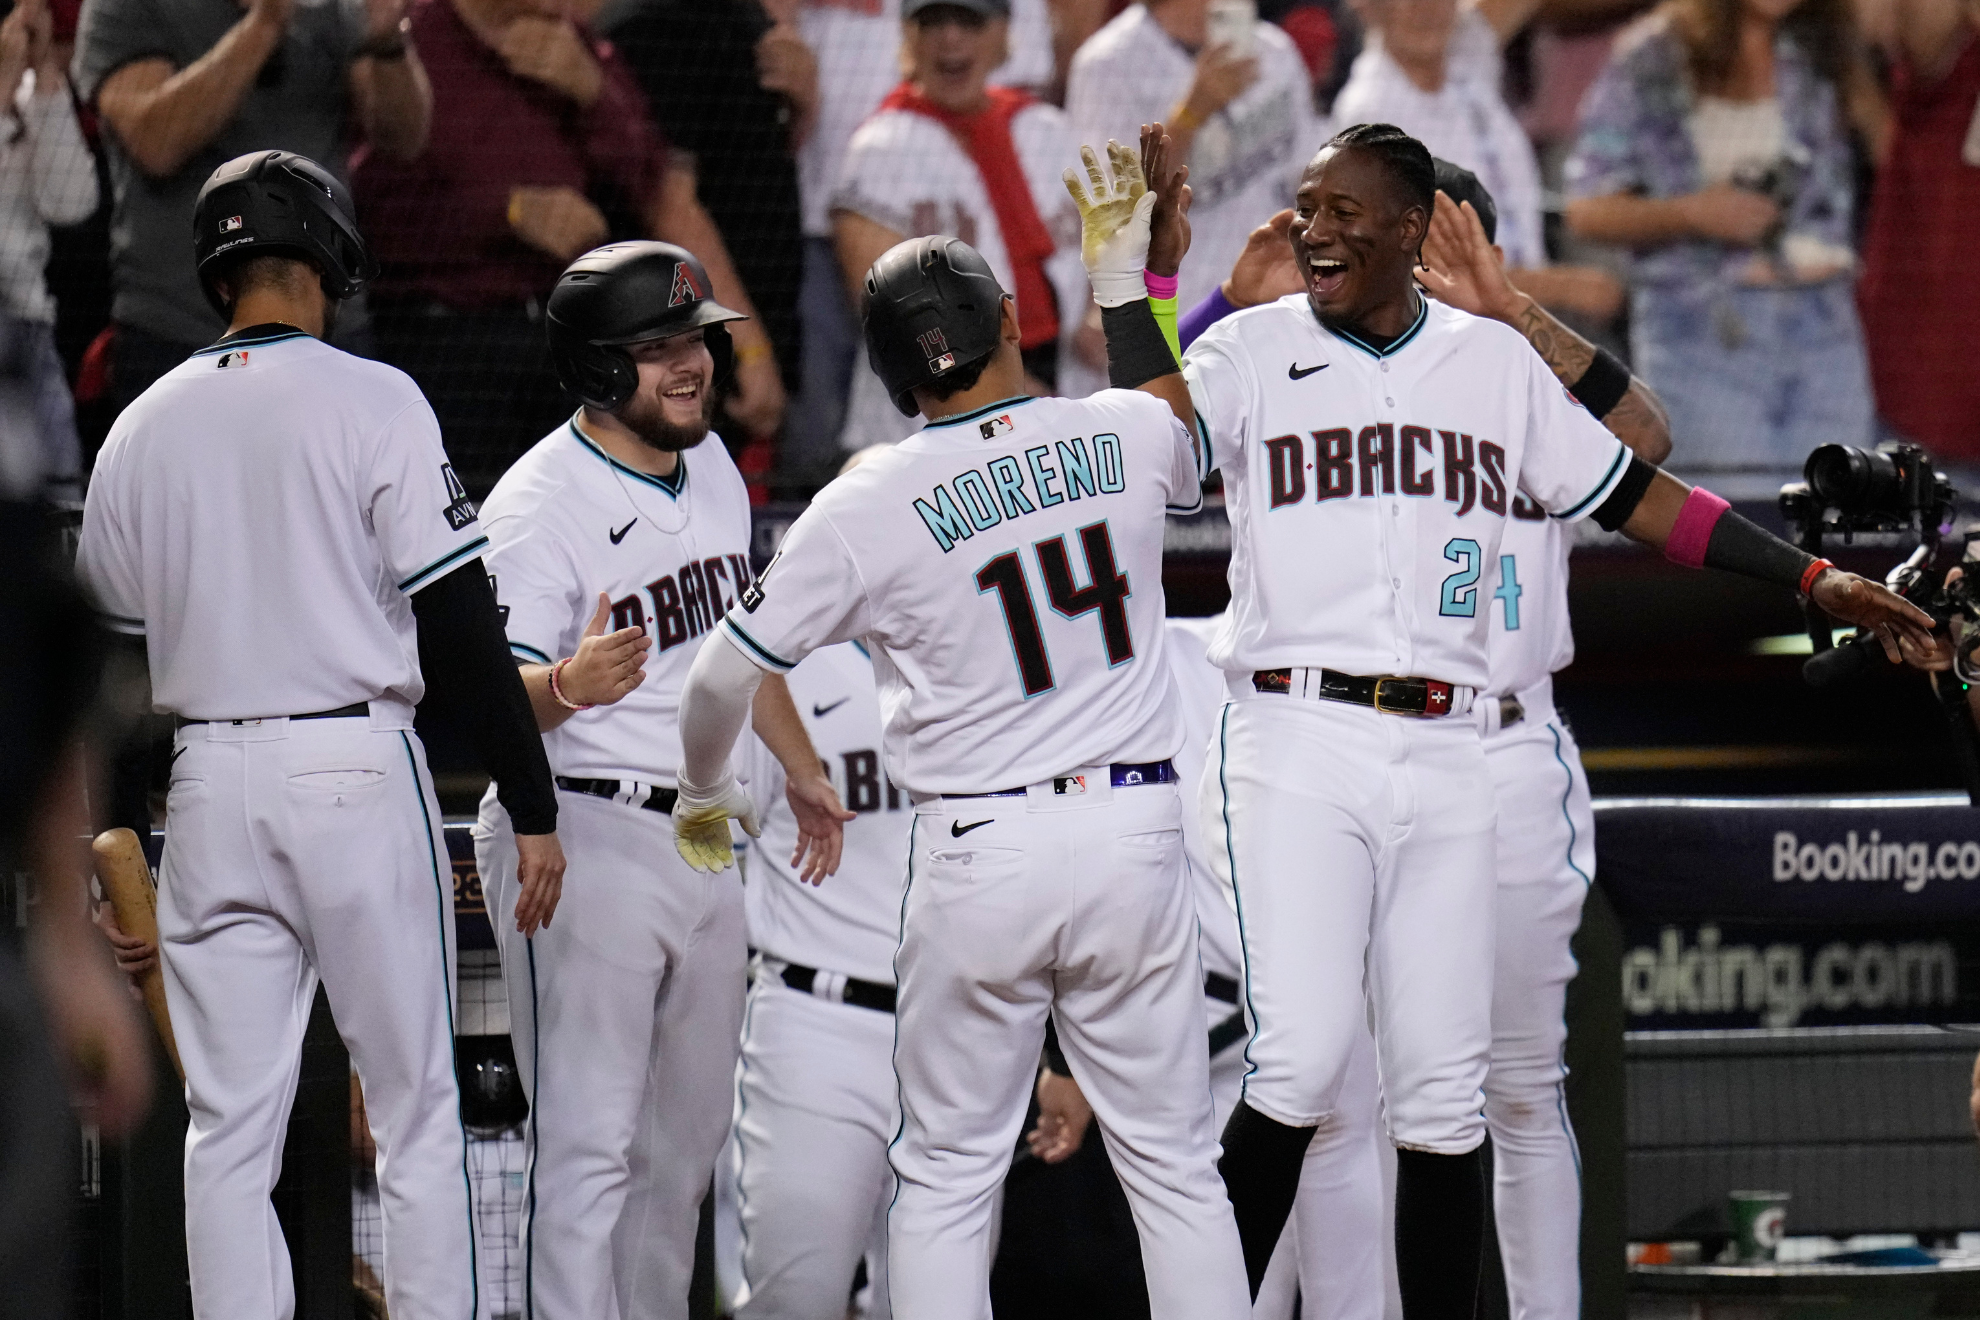 The Arizona Diamondbacks will be in the NLCS for the first time since 2007.